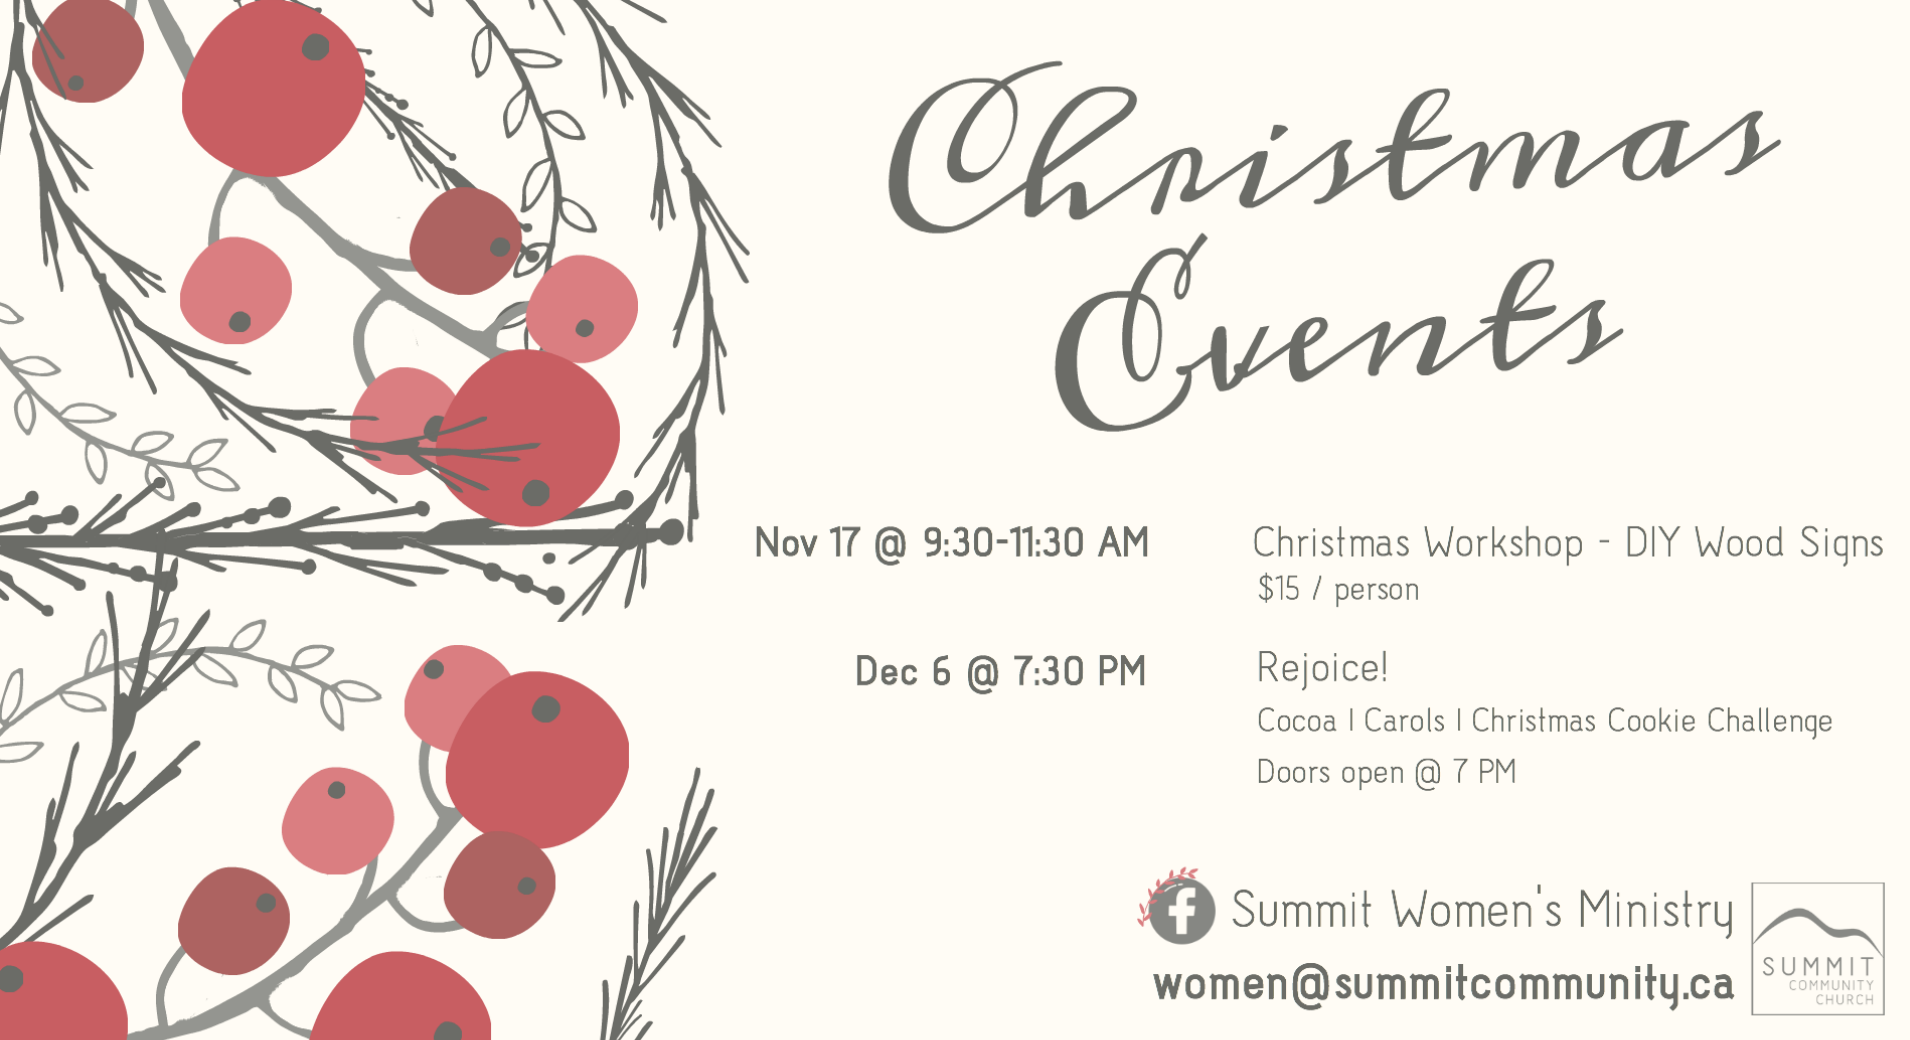 Women's Christmas Events Card 2018